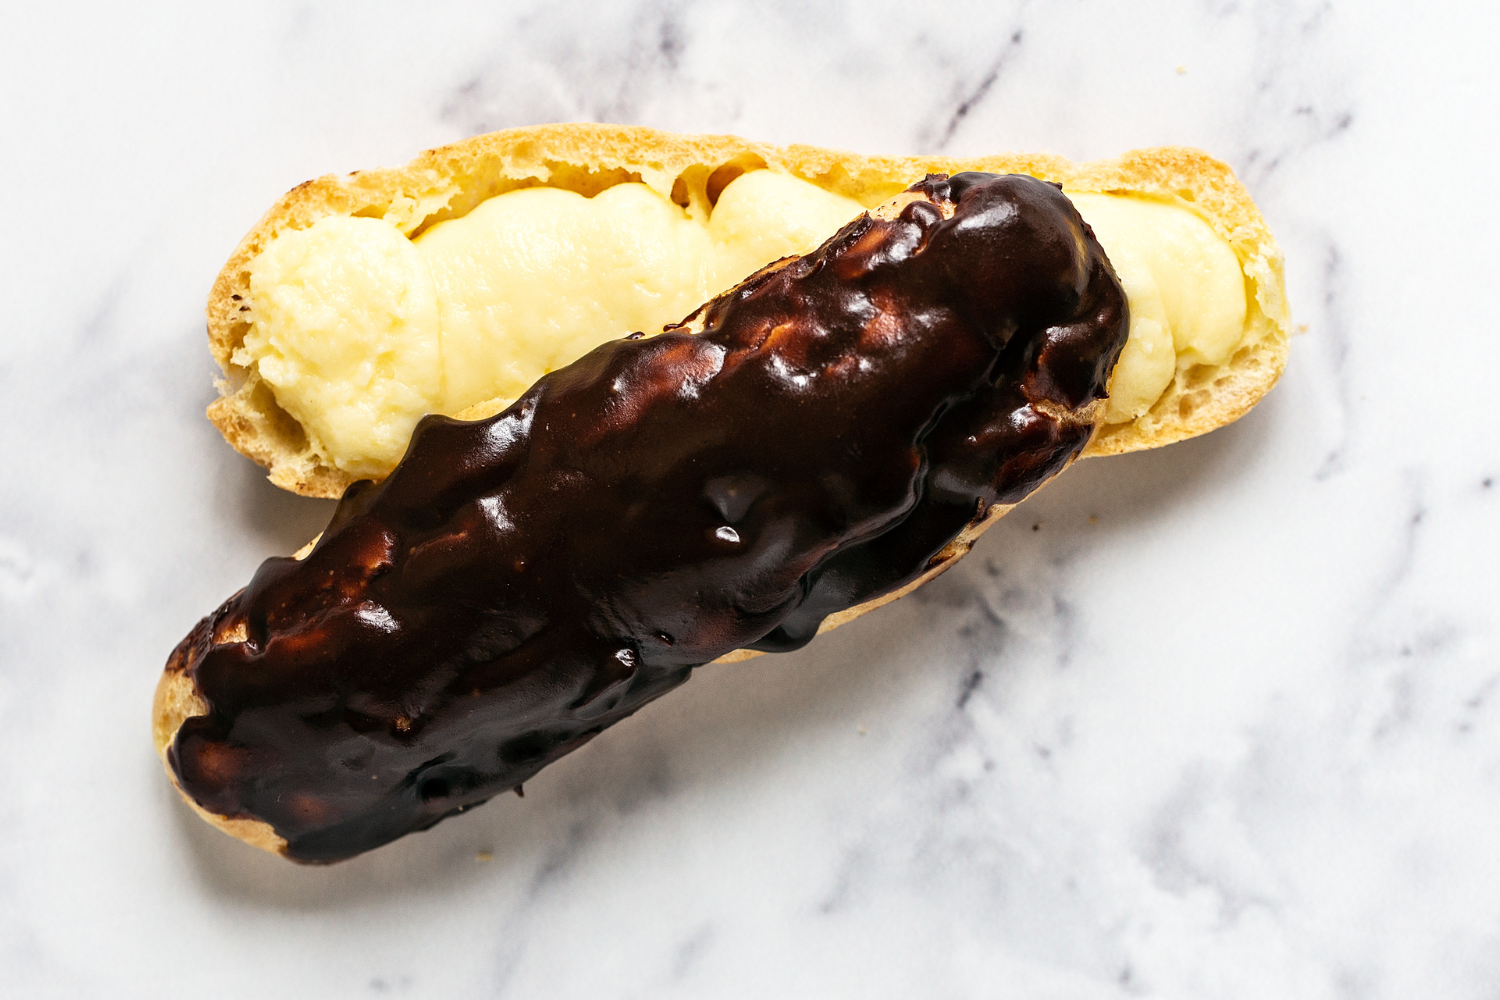 one eclair split in half to fill, waiting to be fully assembled to serve.